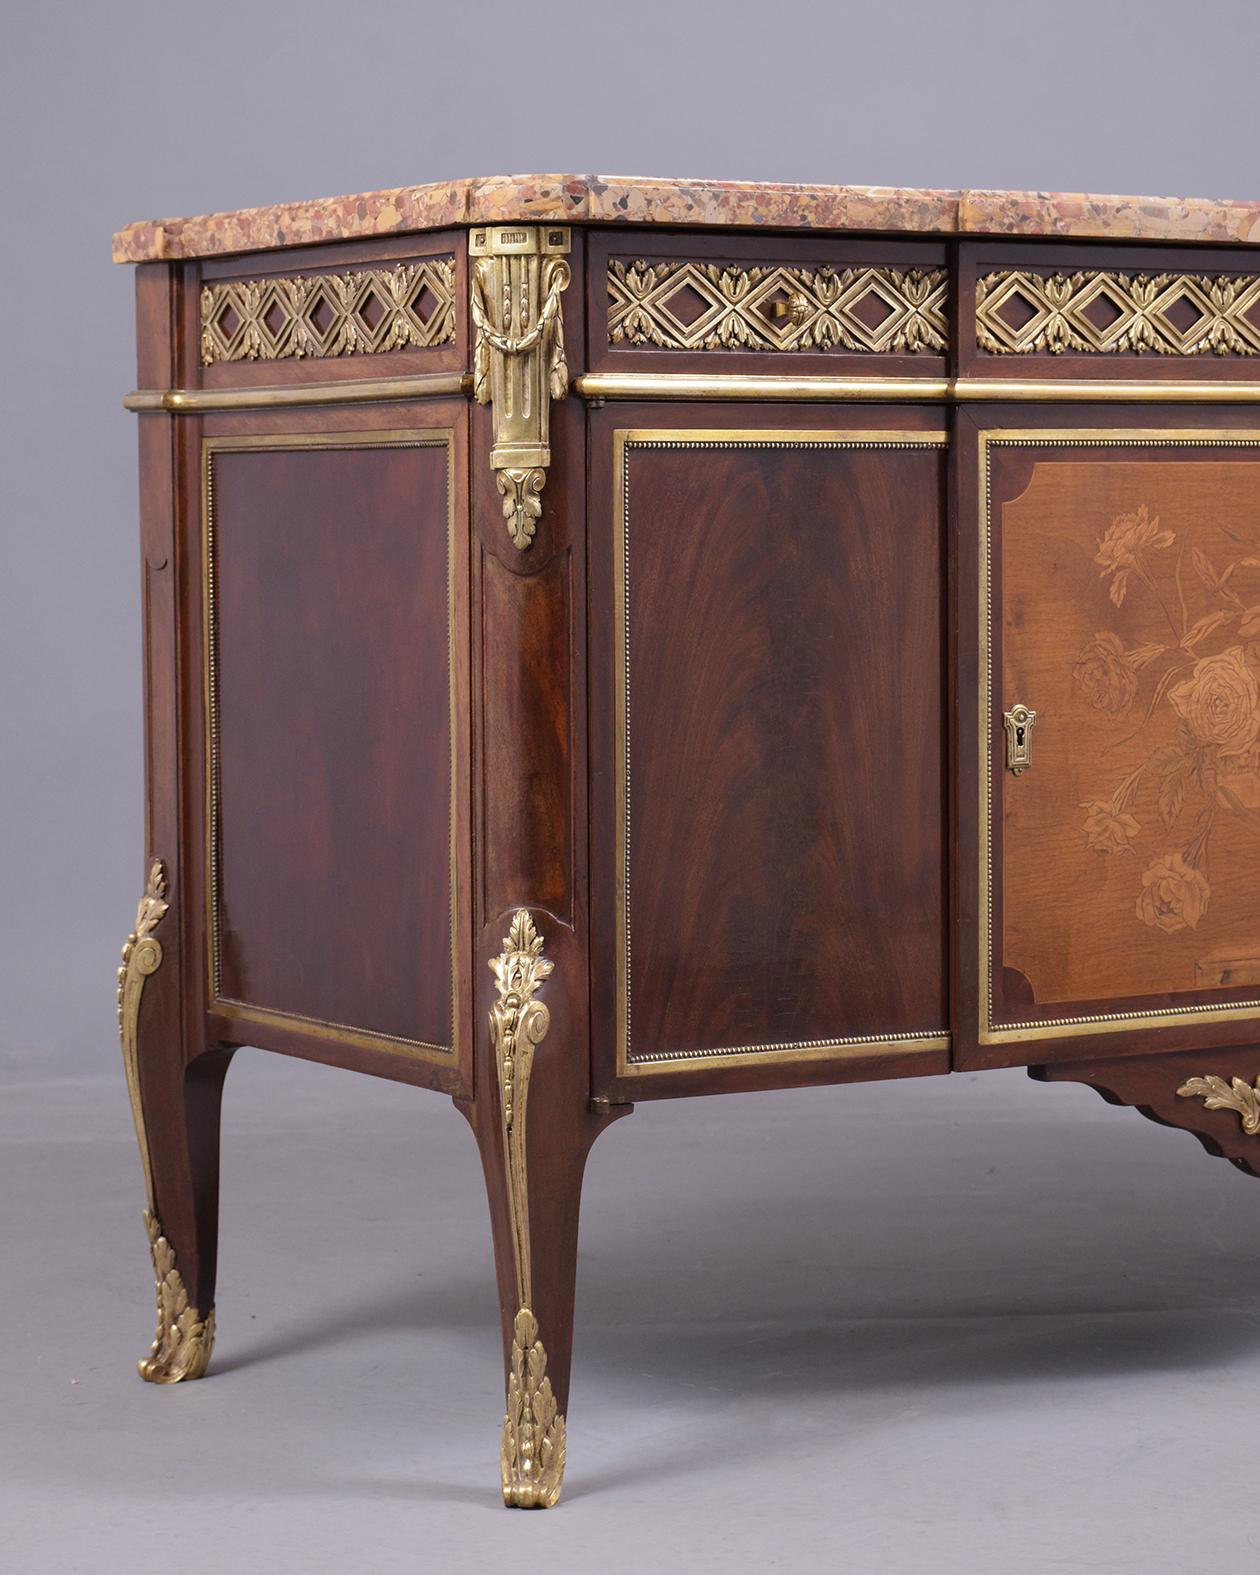 19th-Century French Louis XVI Buffet: Antique Mahogany and Bronze Marquetry Comm 7